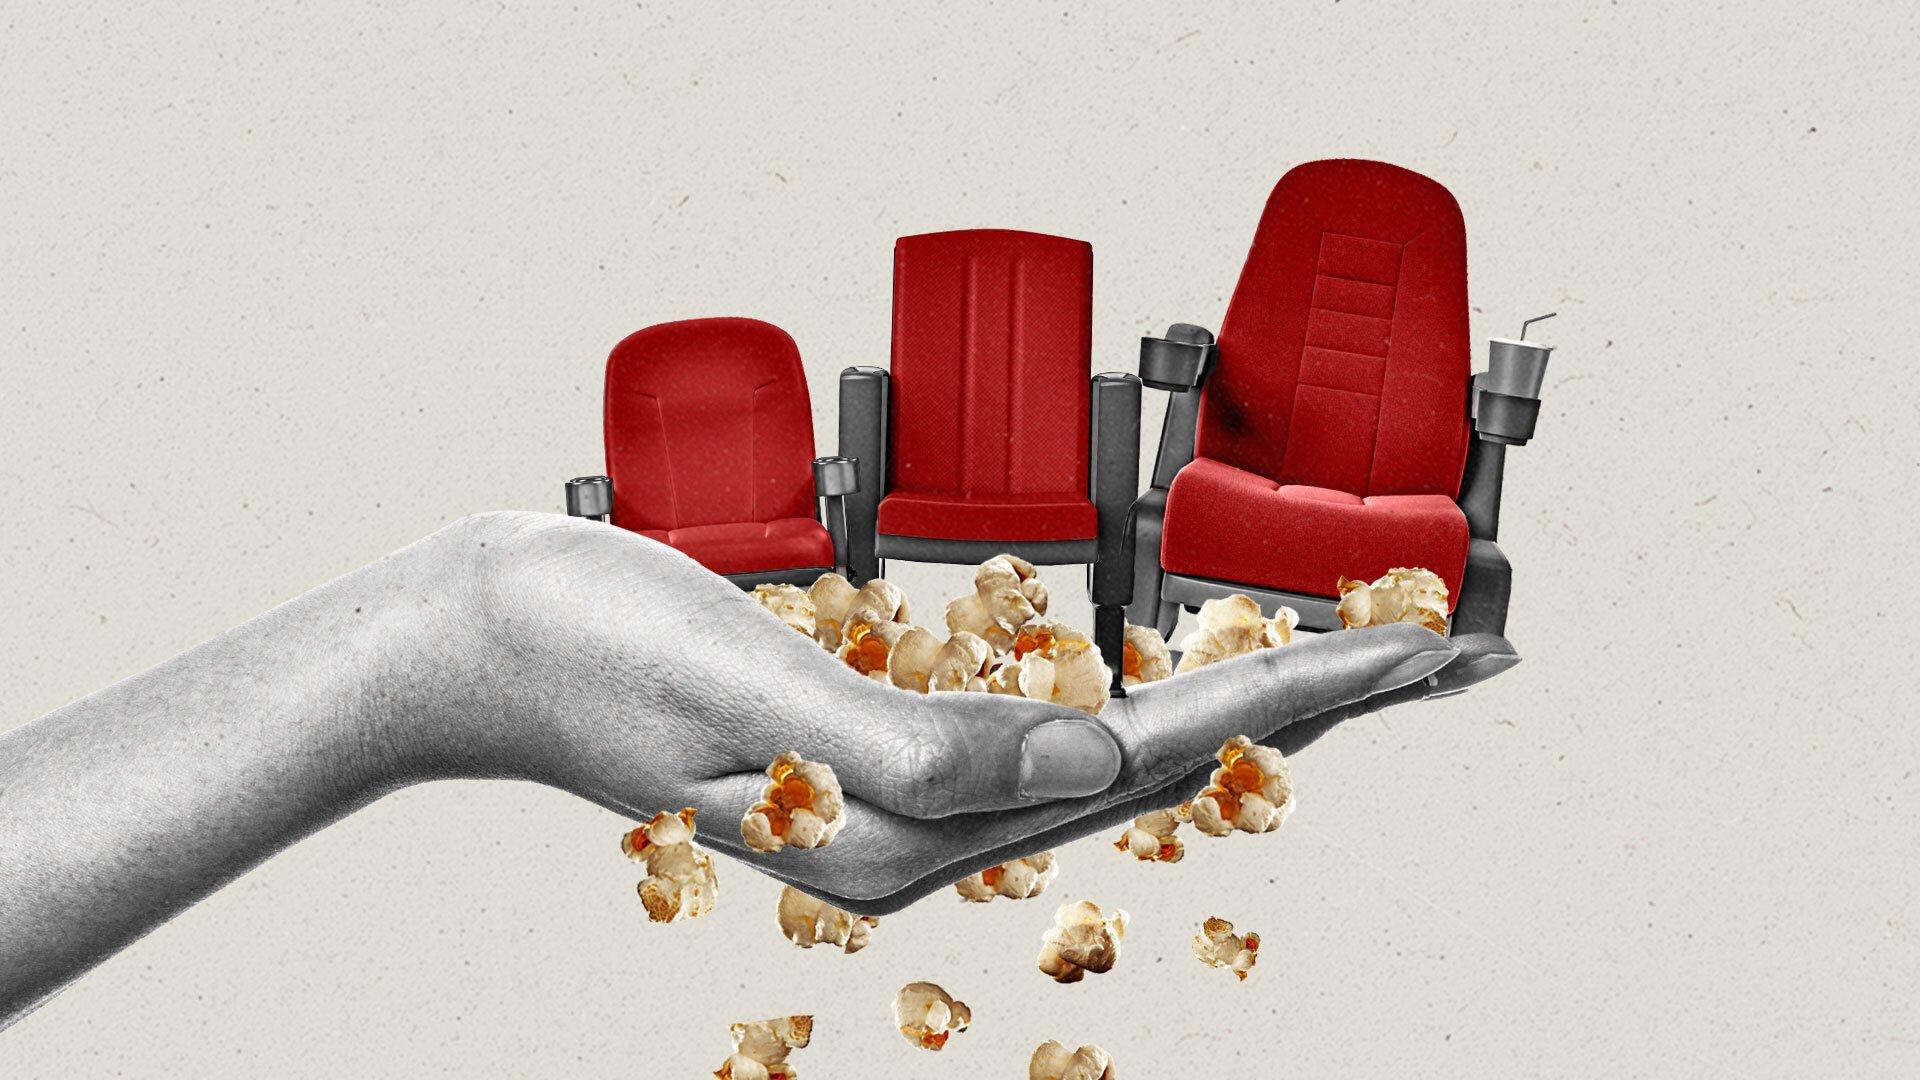 Popcorn spills from a hand holding three red movie theater seats of increasing height.